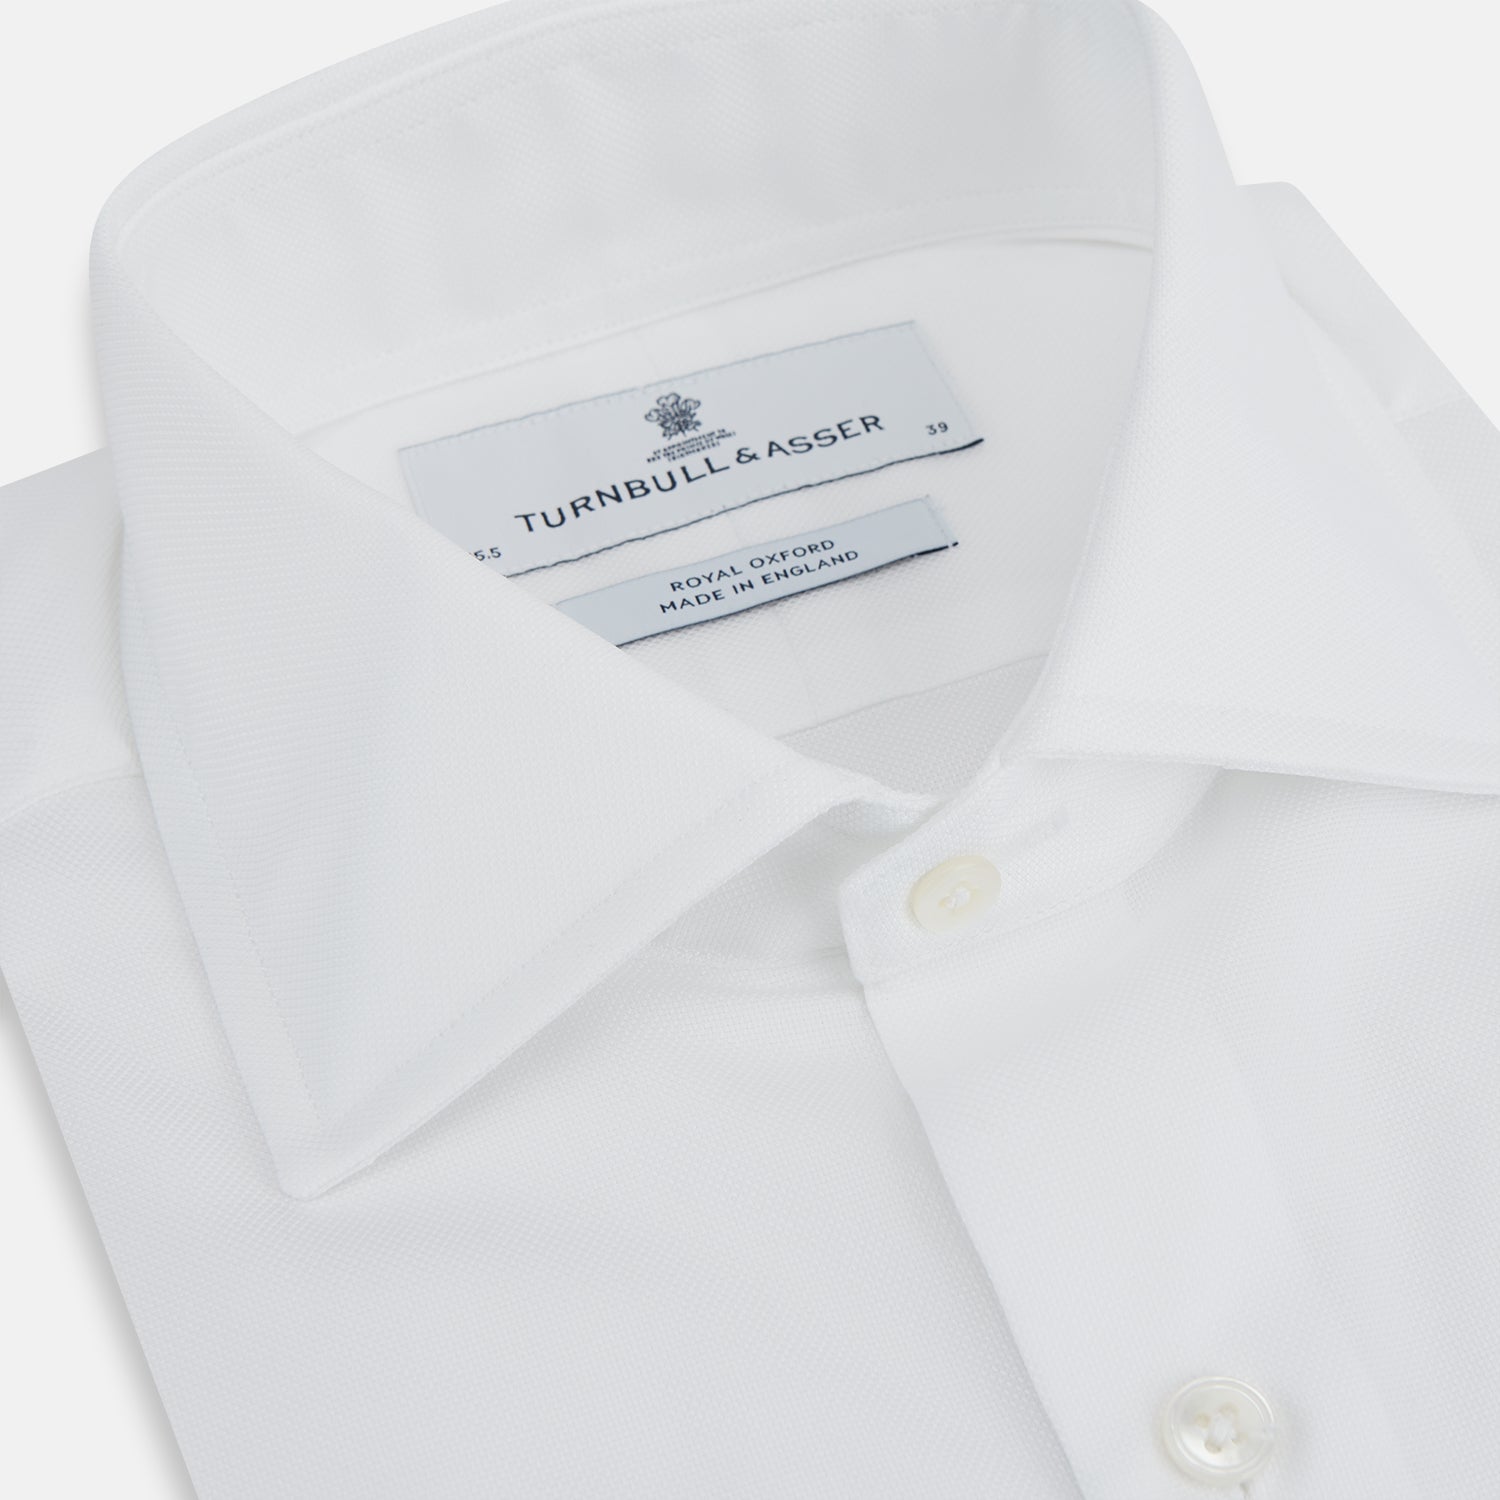 Tailored Fit White Royal Oxford Cotton Shirt with Kent Collar and Double Cuffs